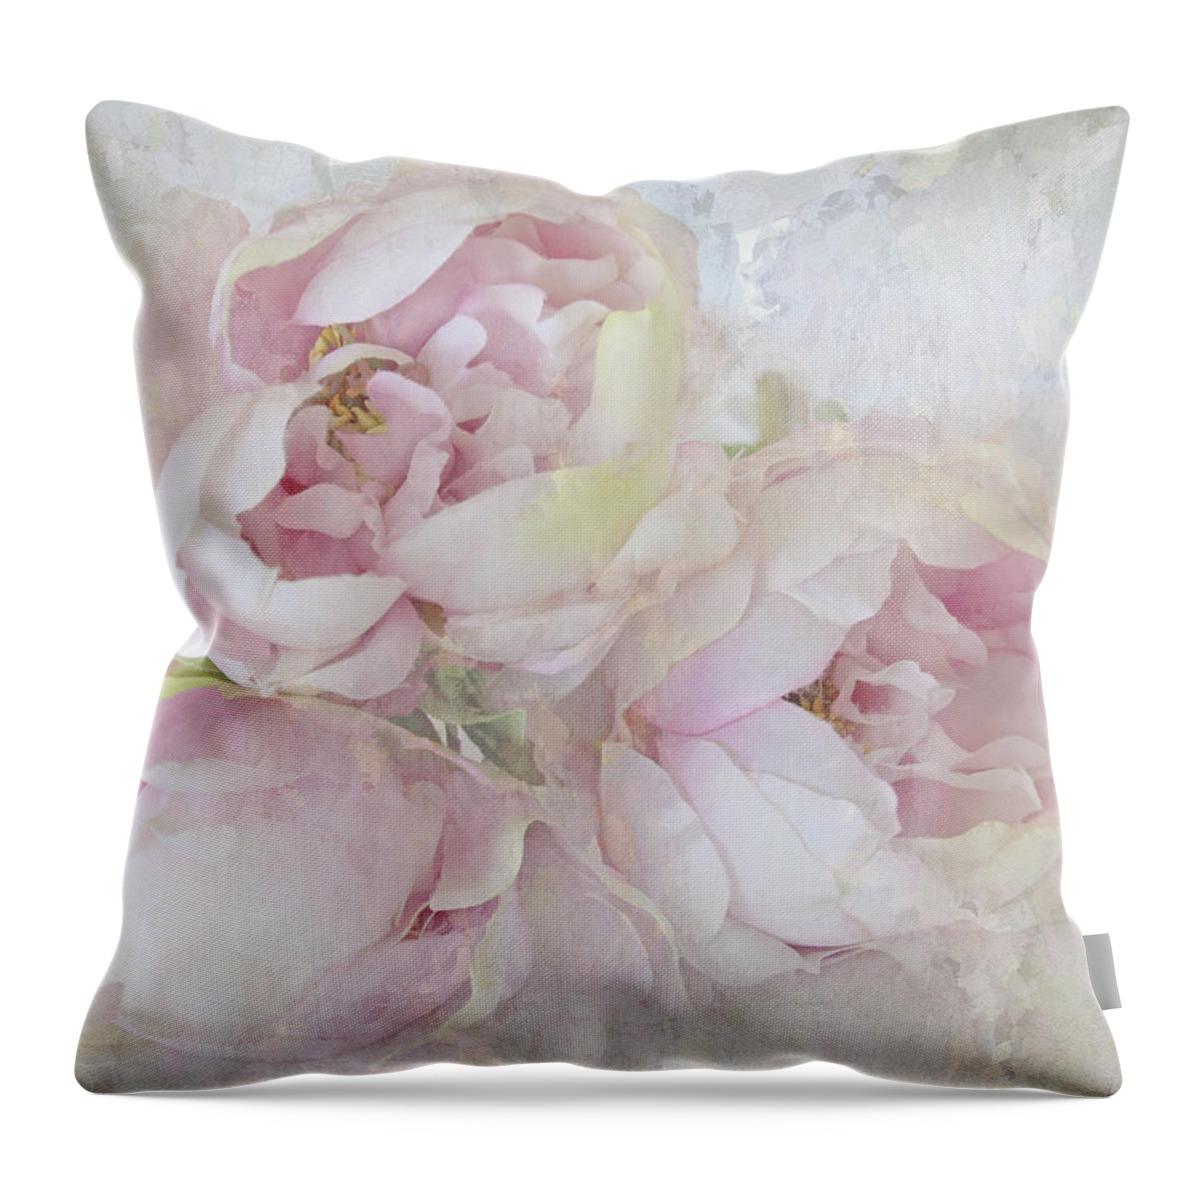 Flower Throw Pillow featuring the photograph Three Peonies by Karen Lynch